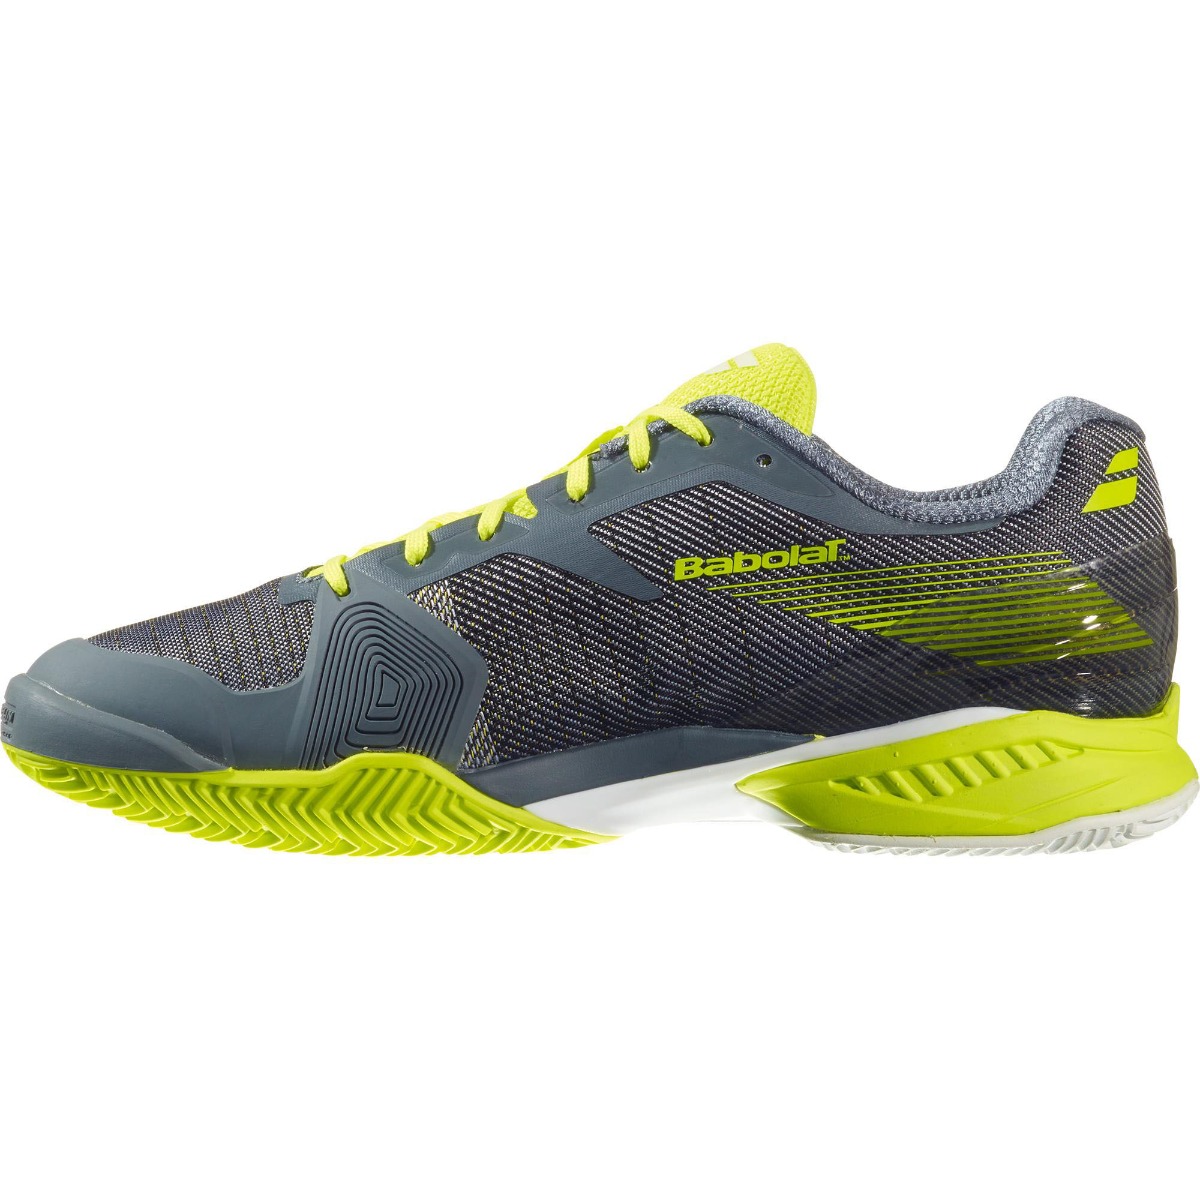 piek september doden Babolat Jet All Court M - Grey & Yellow online at best price | Best Tennis  Shoes on Sports365.in - India's best online sports store